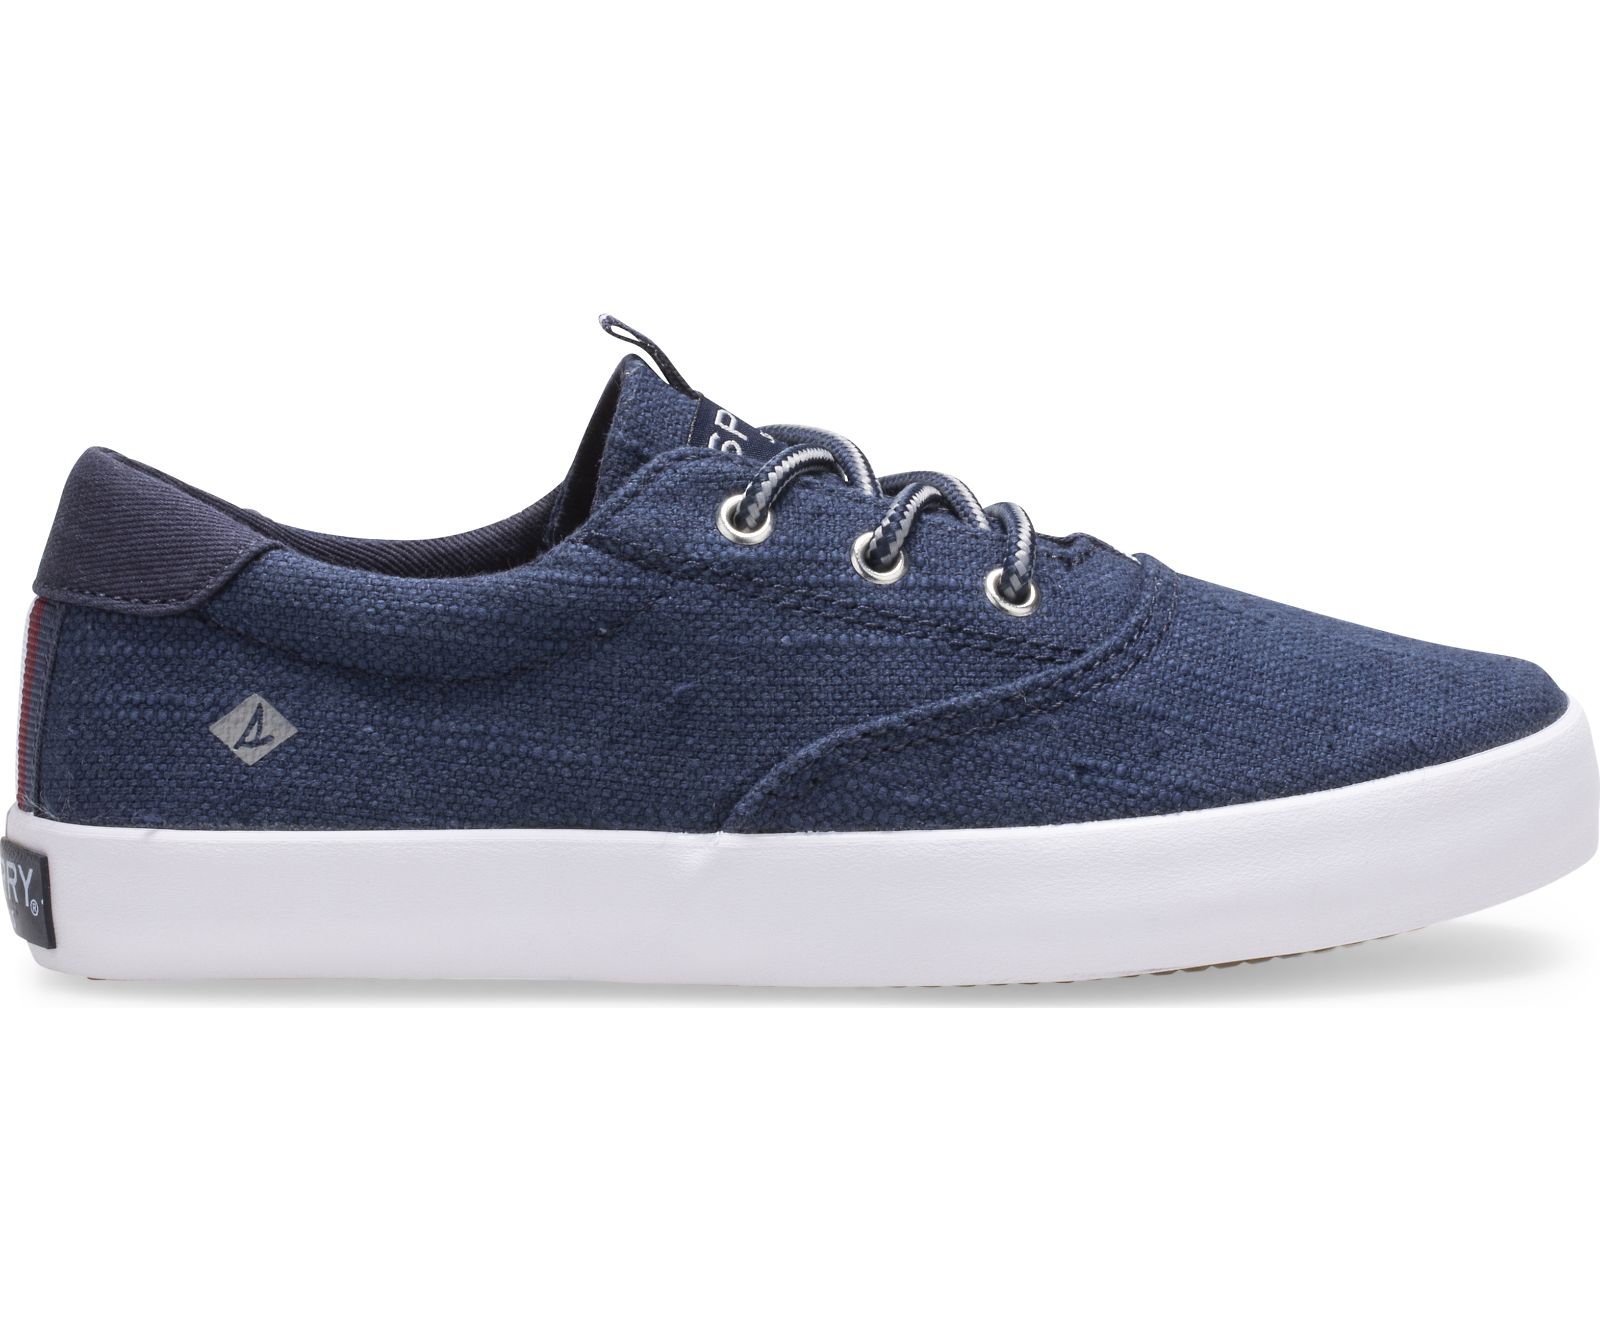 Big Kid's Spinnaker Washable Sneaker - Navy - Click Image to Close